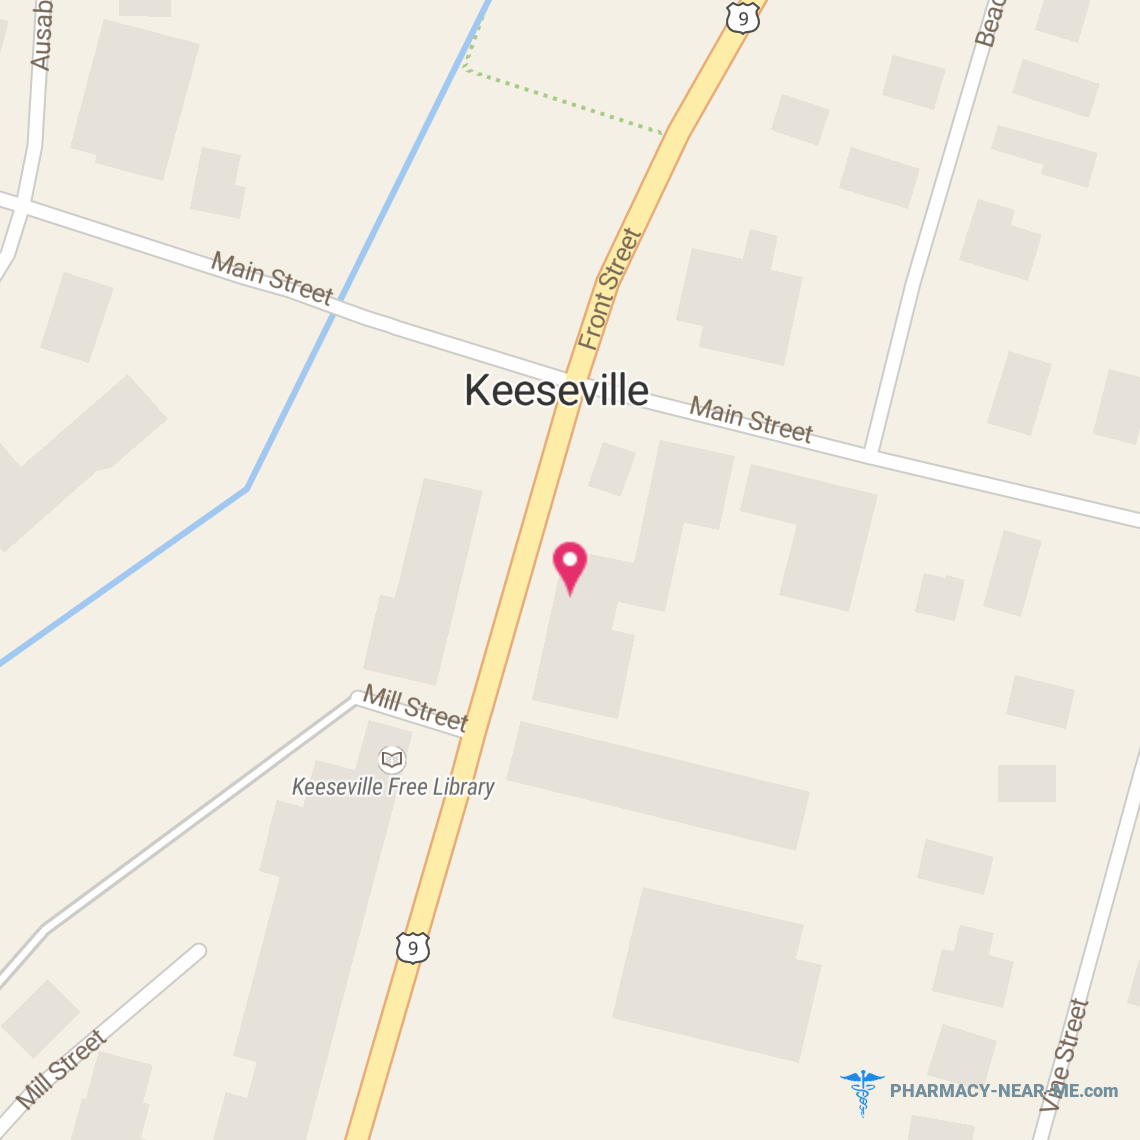 KEESEVILLE PHARMACY, INC - Pharmacy Hours, Phone, Reviews & Information: 1730 Front Street, Keeseville, New York 12944, United States